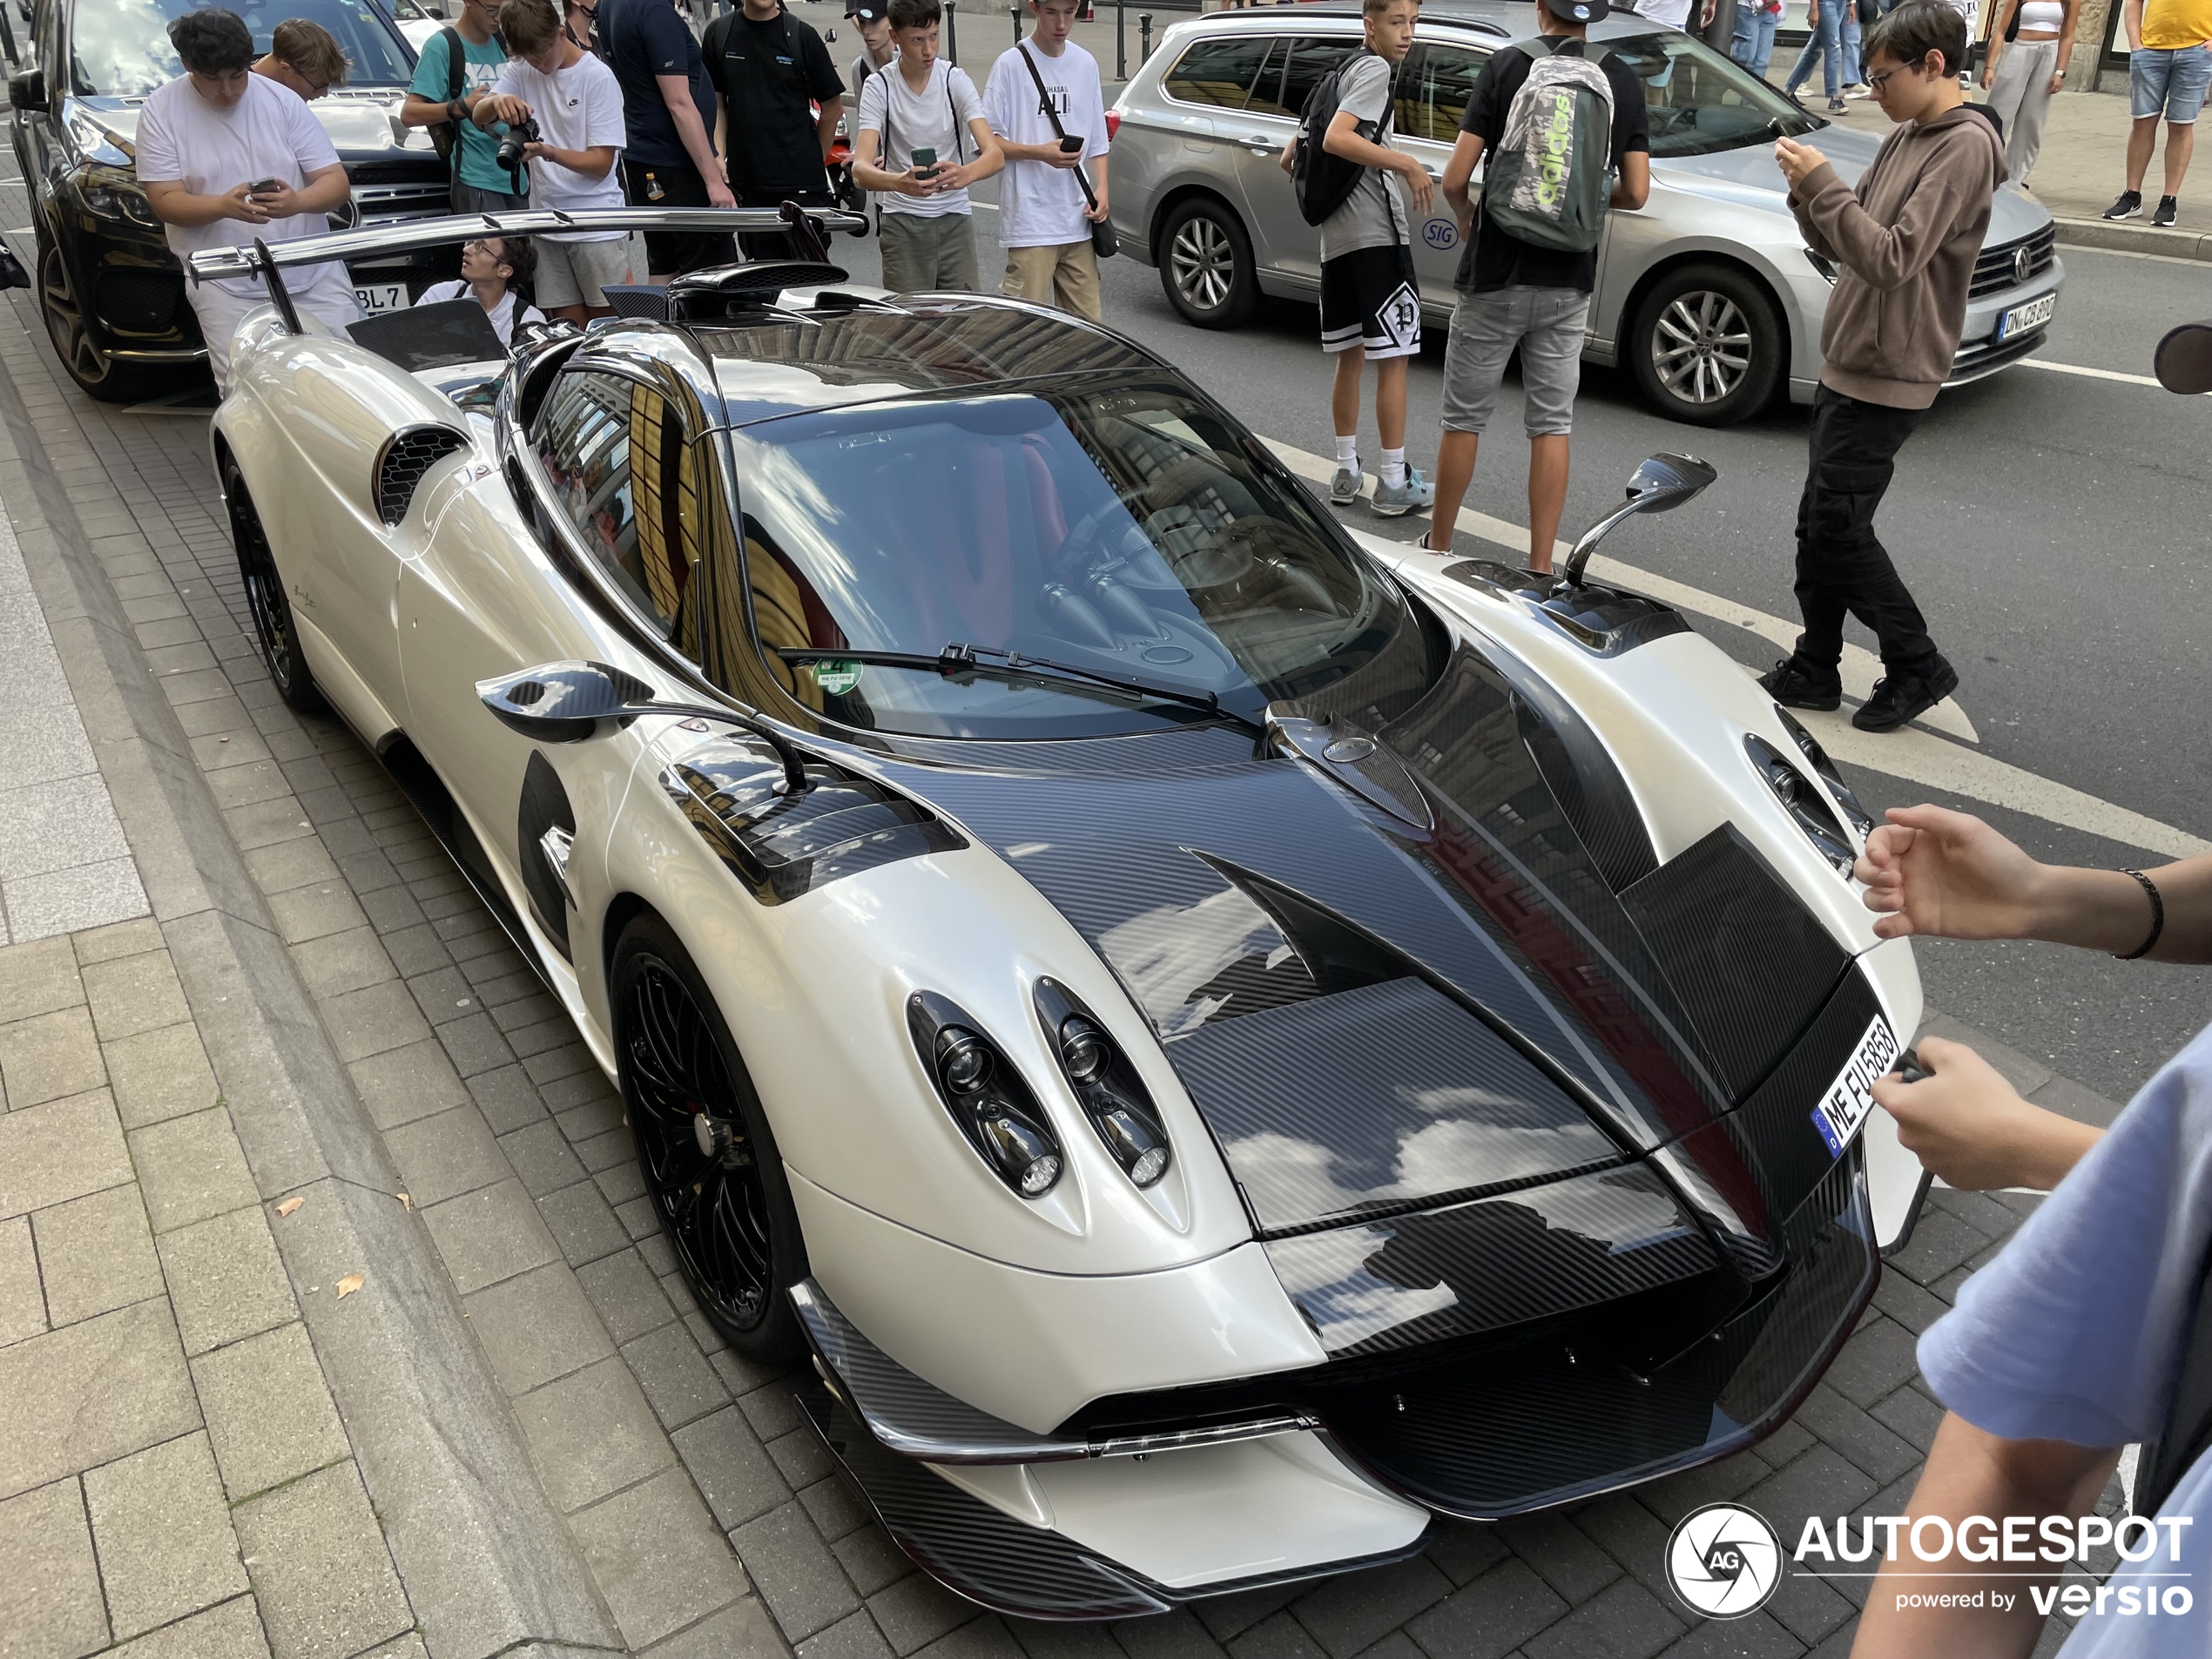 Another Huayra shows up in Düsseldorf